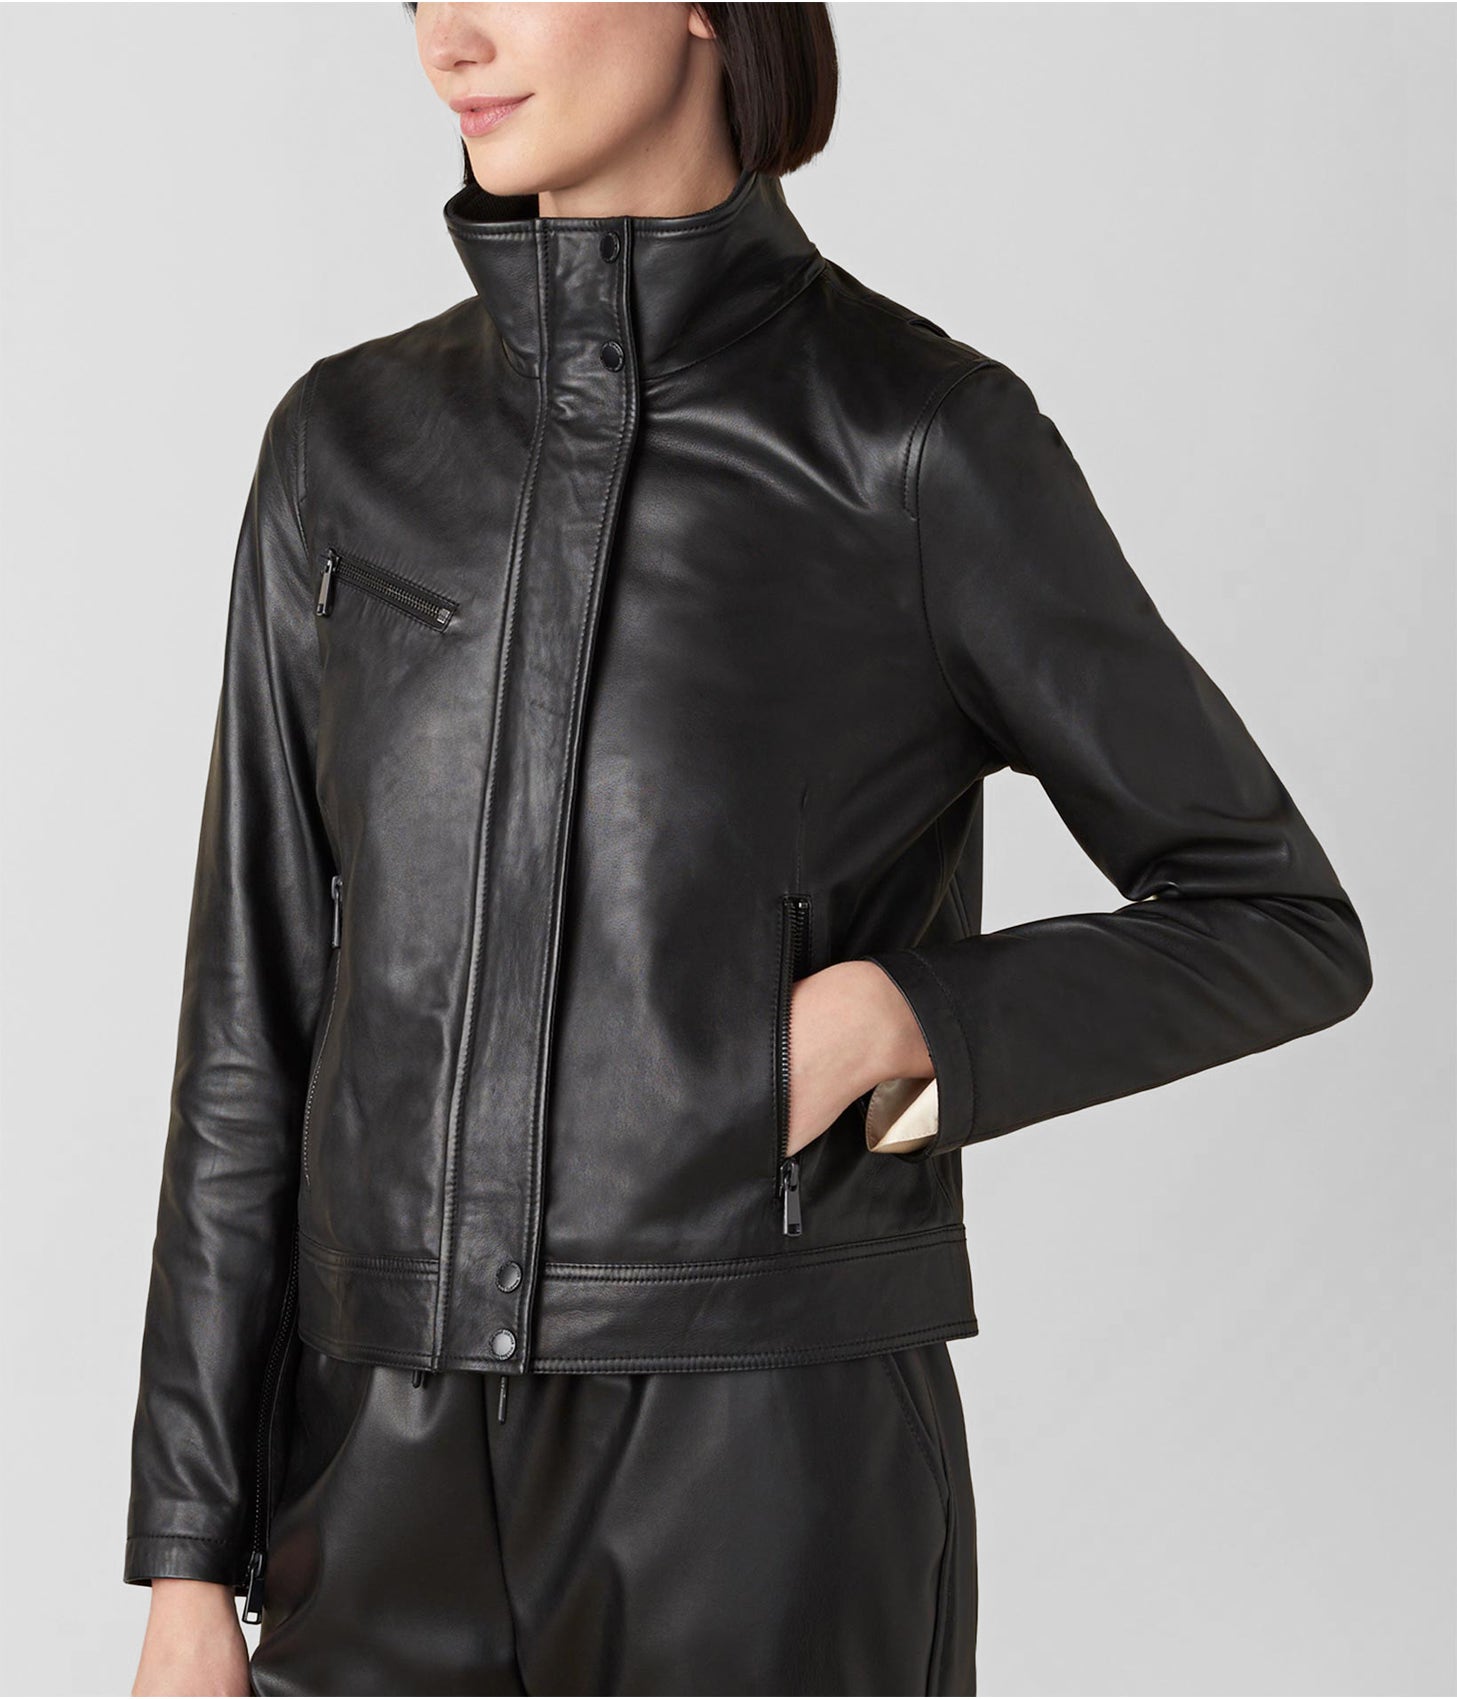 Women's Leather Jacket In Black With Turtle Neck